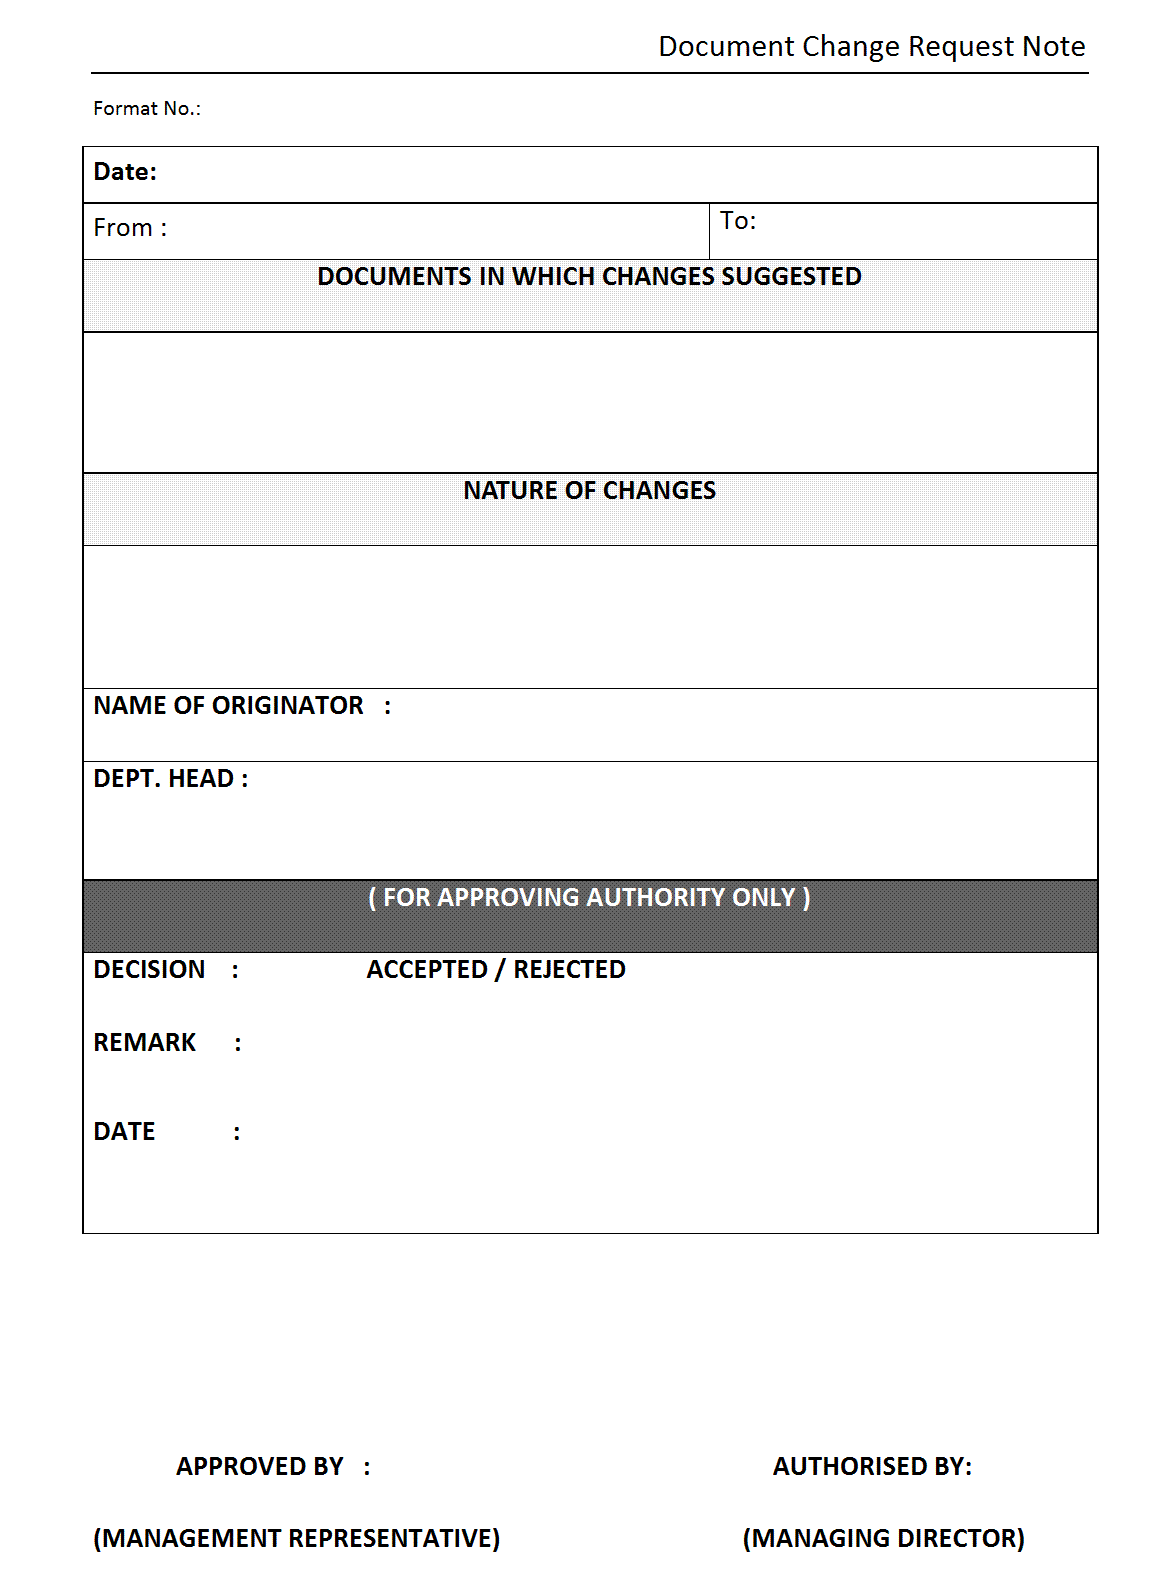 Document change request form template